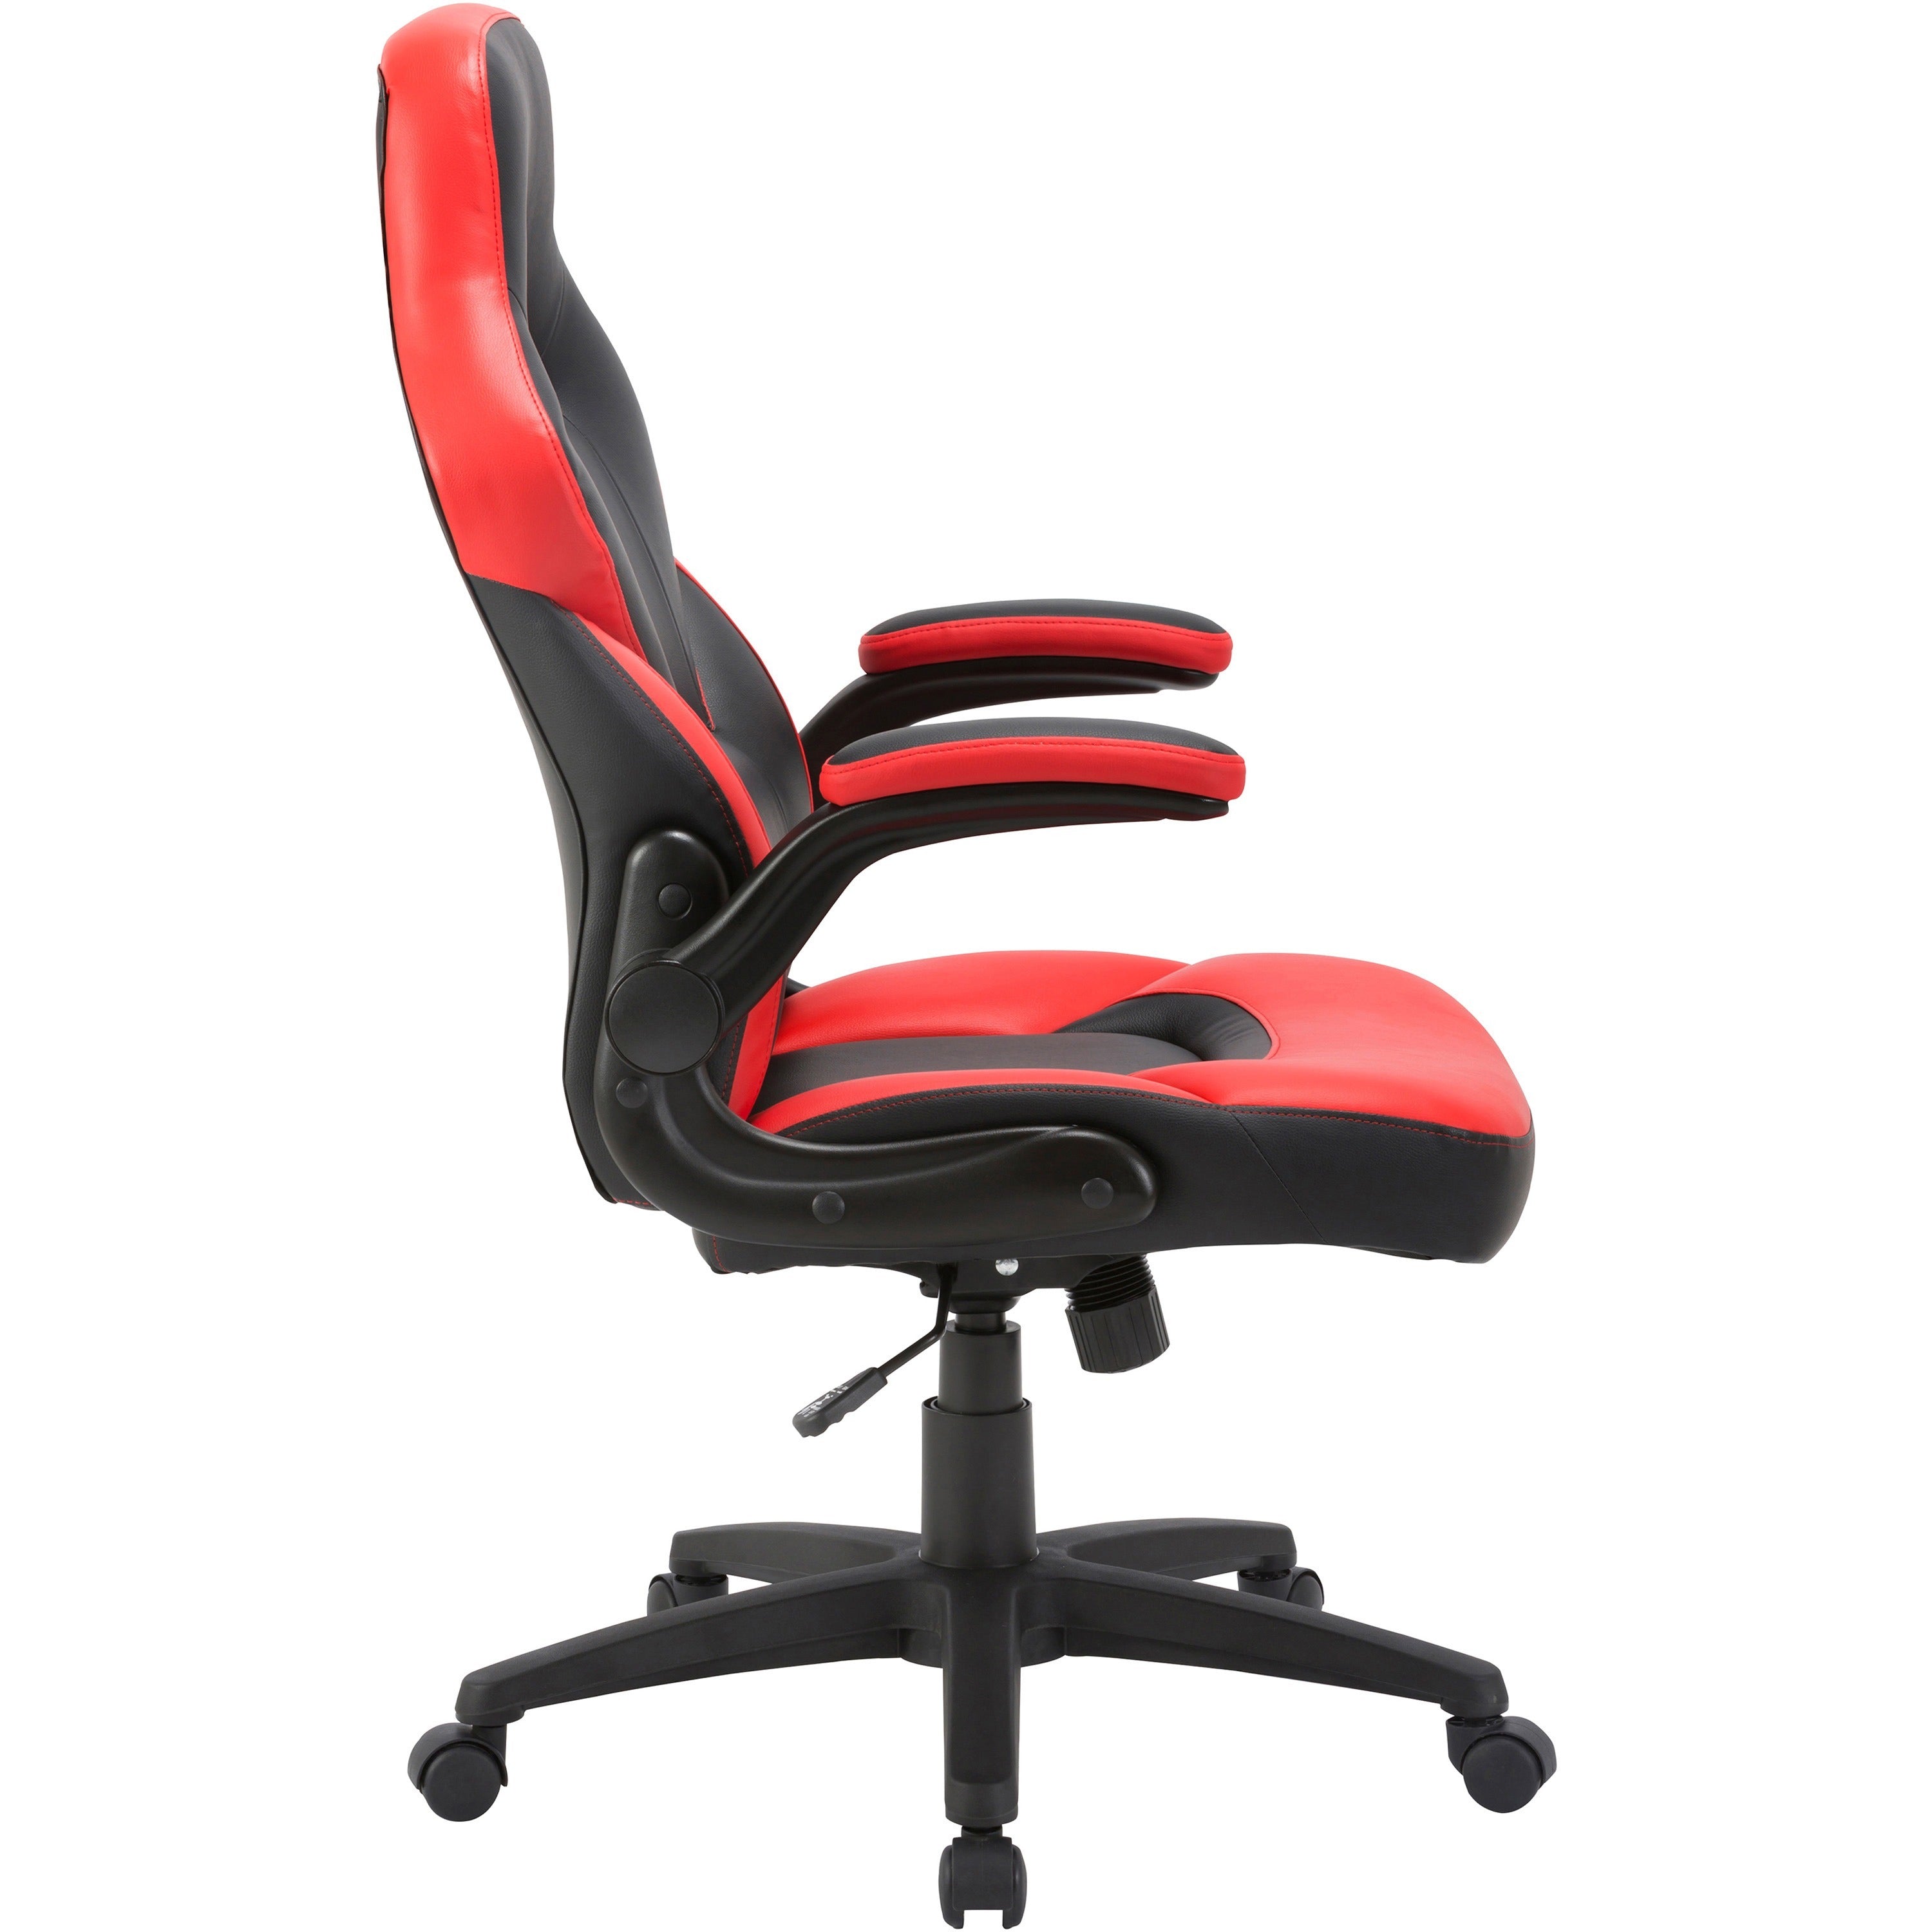 lorell-bucket-seat-high-back-gaming-chair-red-black-seat-red-black-back-5-star-base-28-length-x-205-width-x-475-height_llr84387 - 6